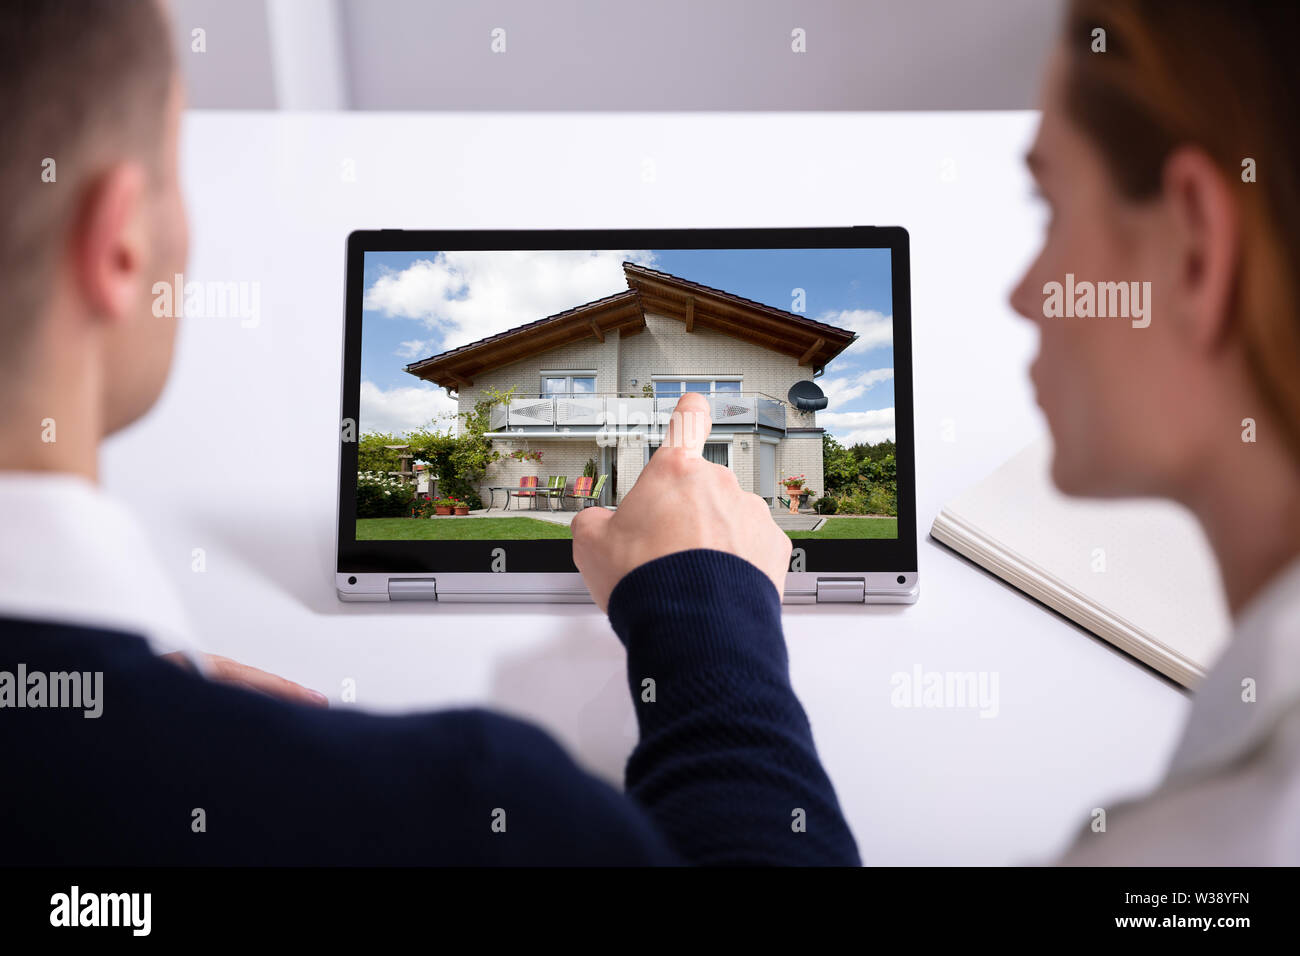 Male Estate Agent's Hand Pointing Laptop Screen Showing House Model Over Desk In Office Stock Photo